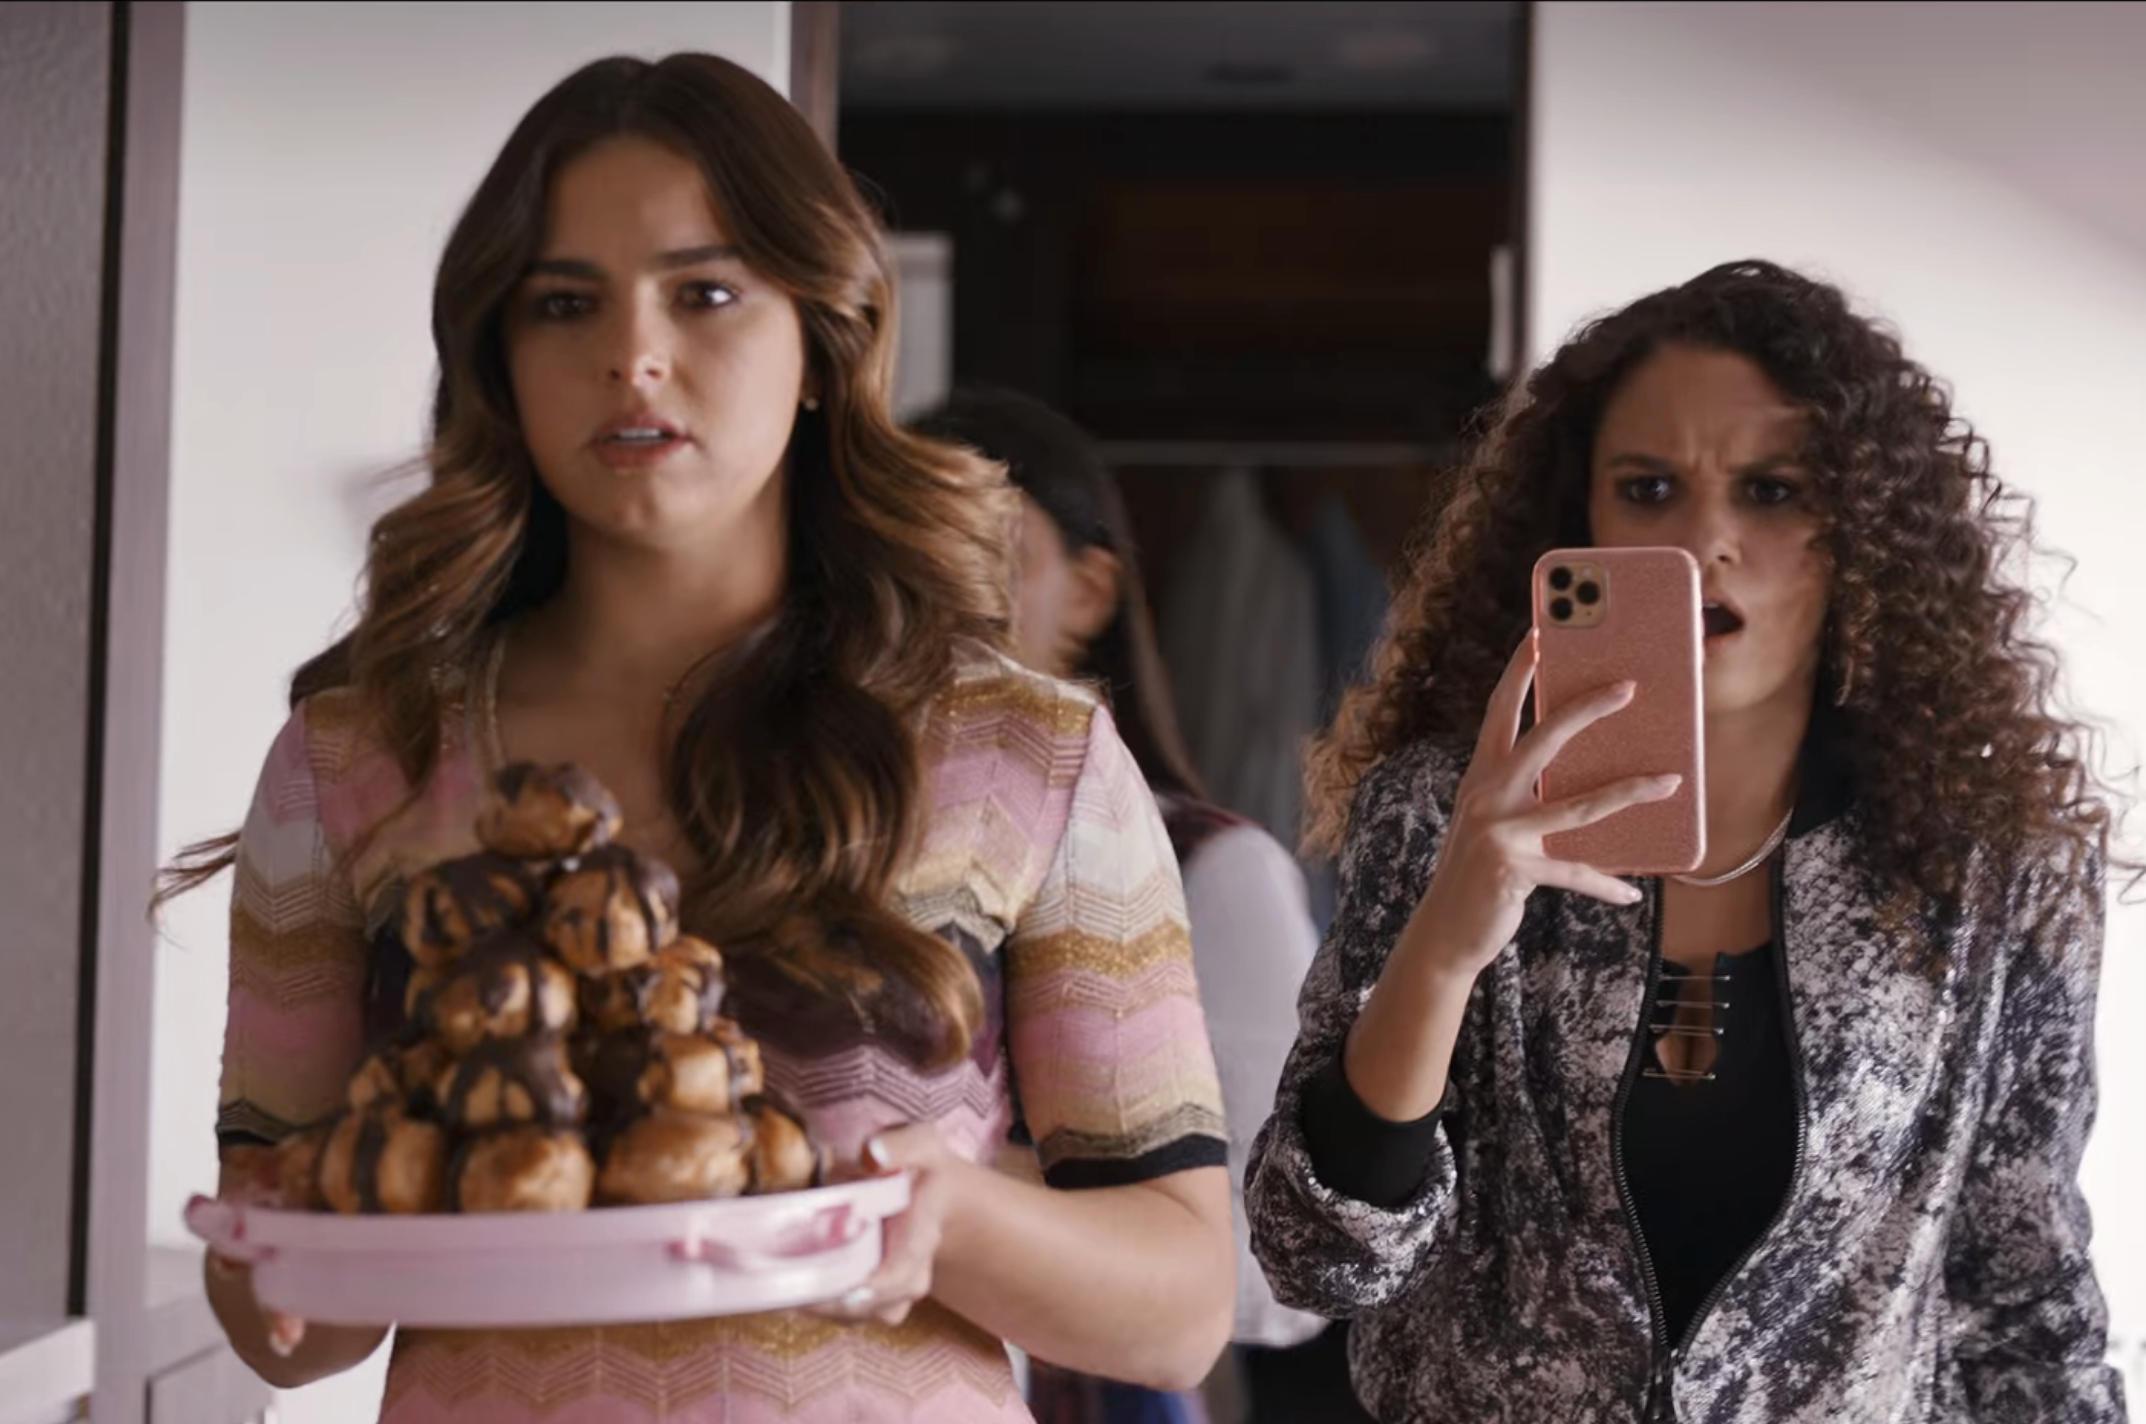 one person holding a plate of desserts while someone behind holds up their phone